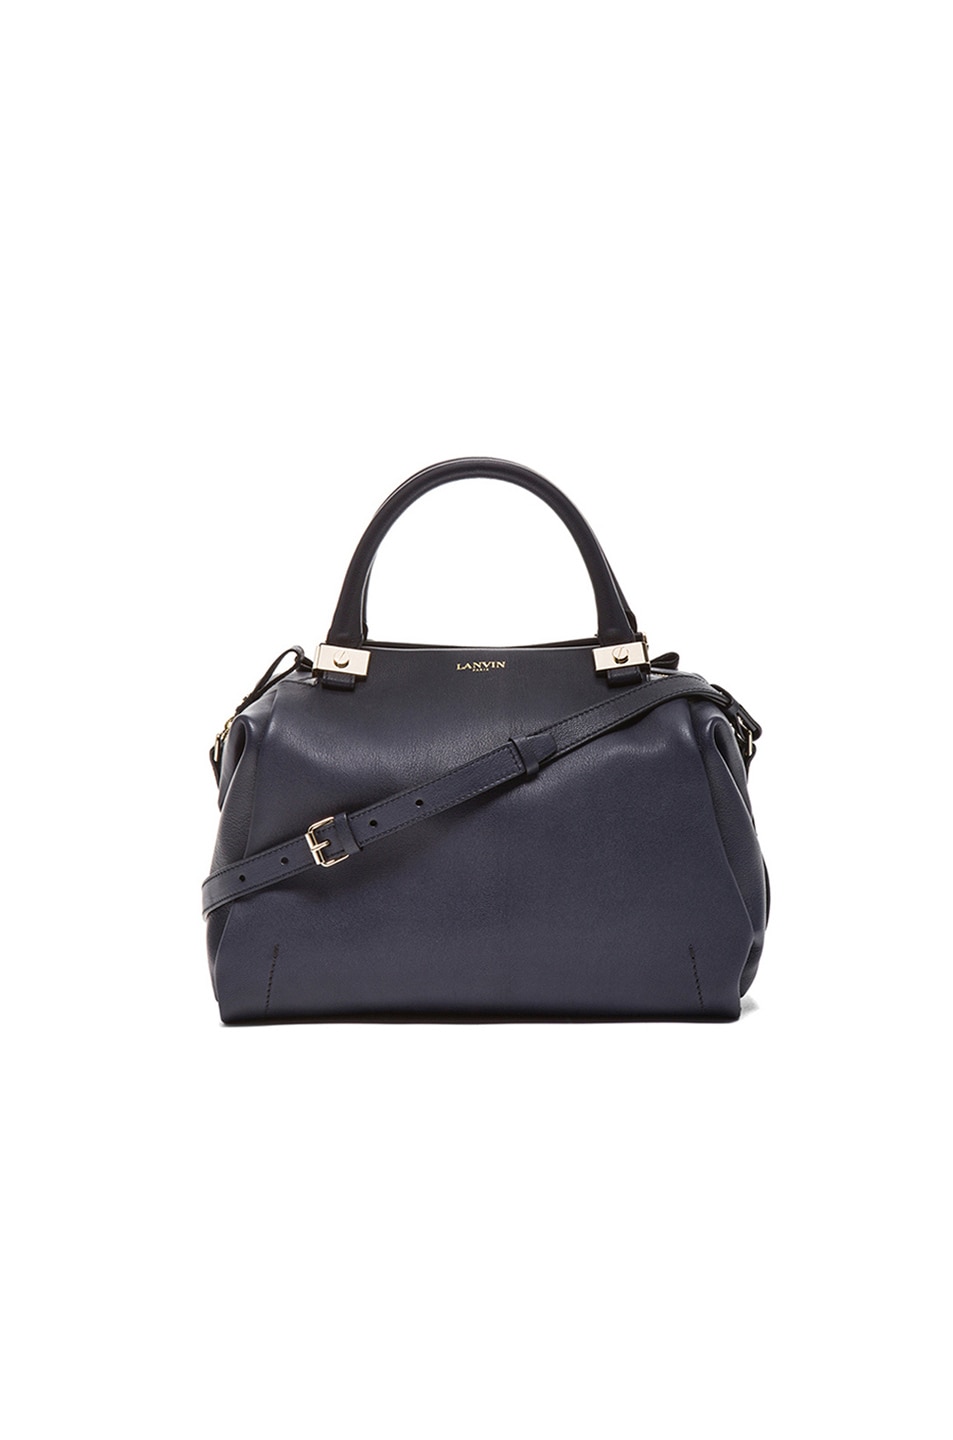 Image 1 of Lanvin Bowling Trilogy Bag in Midnight Blue